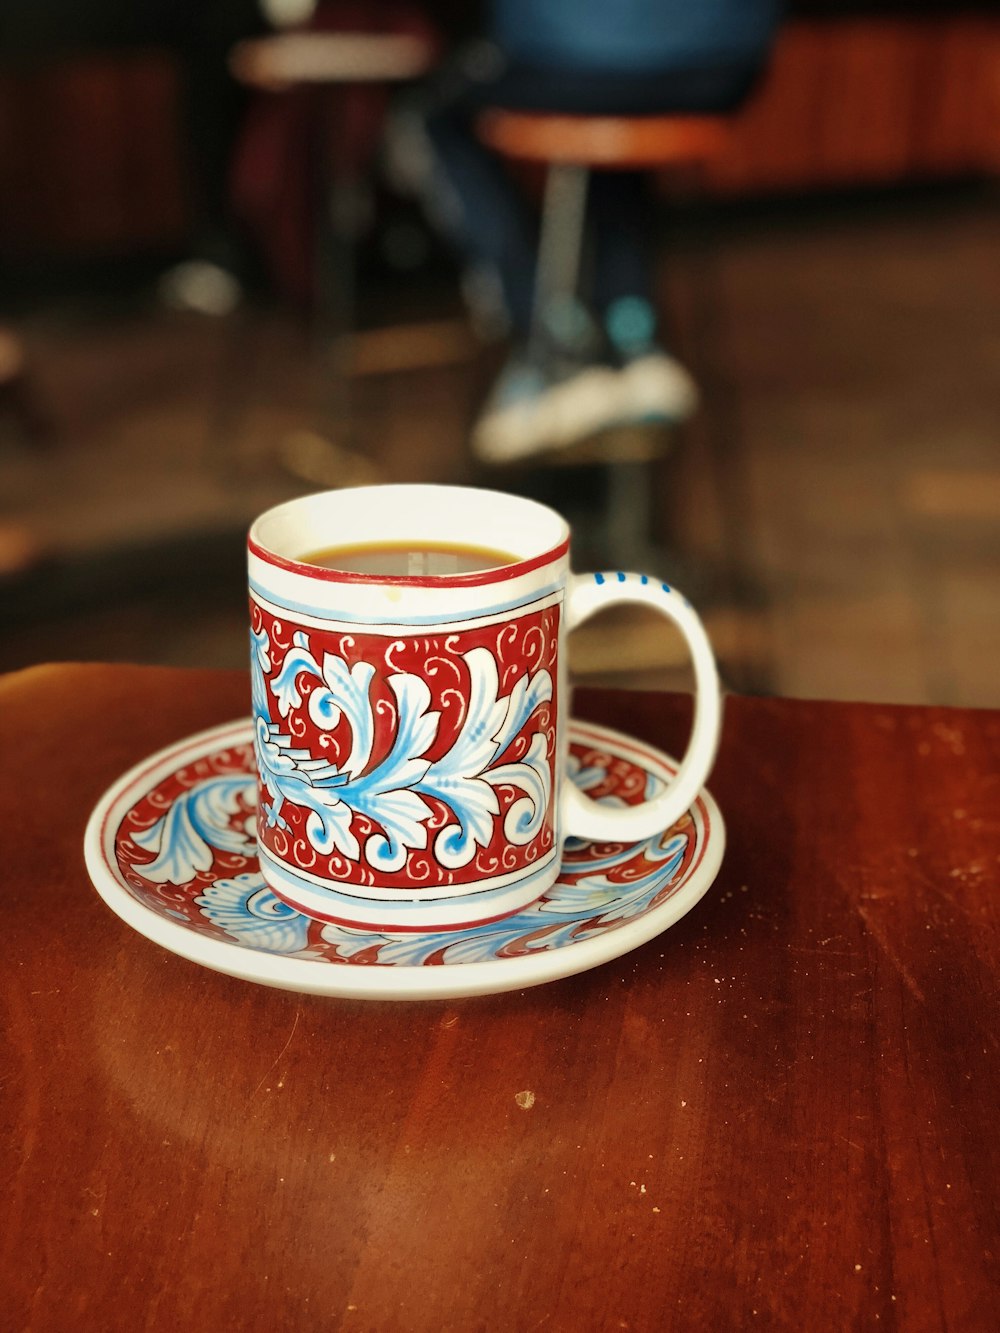 white and red ceramic mug on saucer with brown liquid